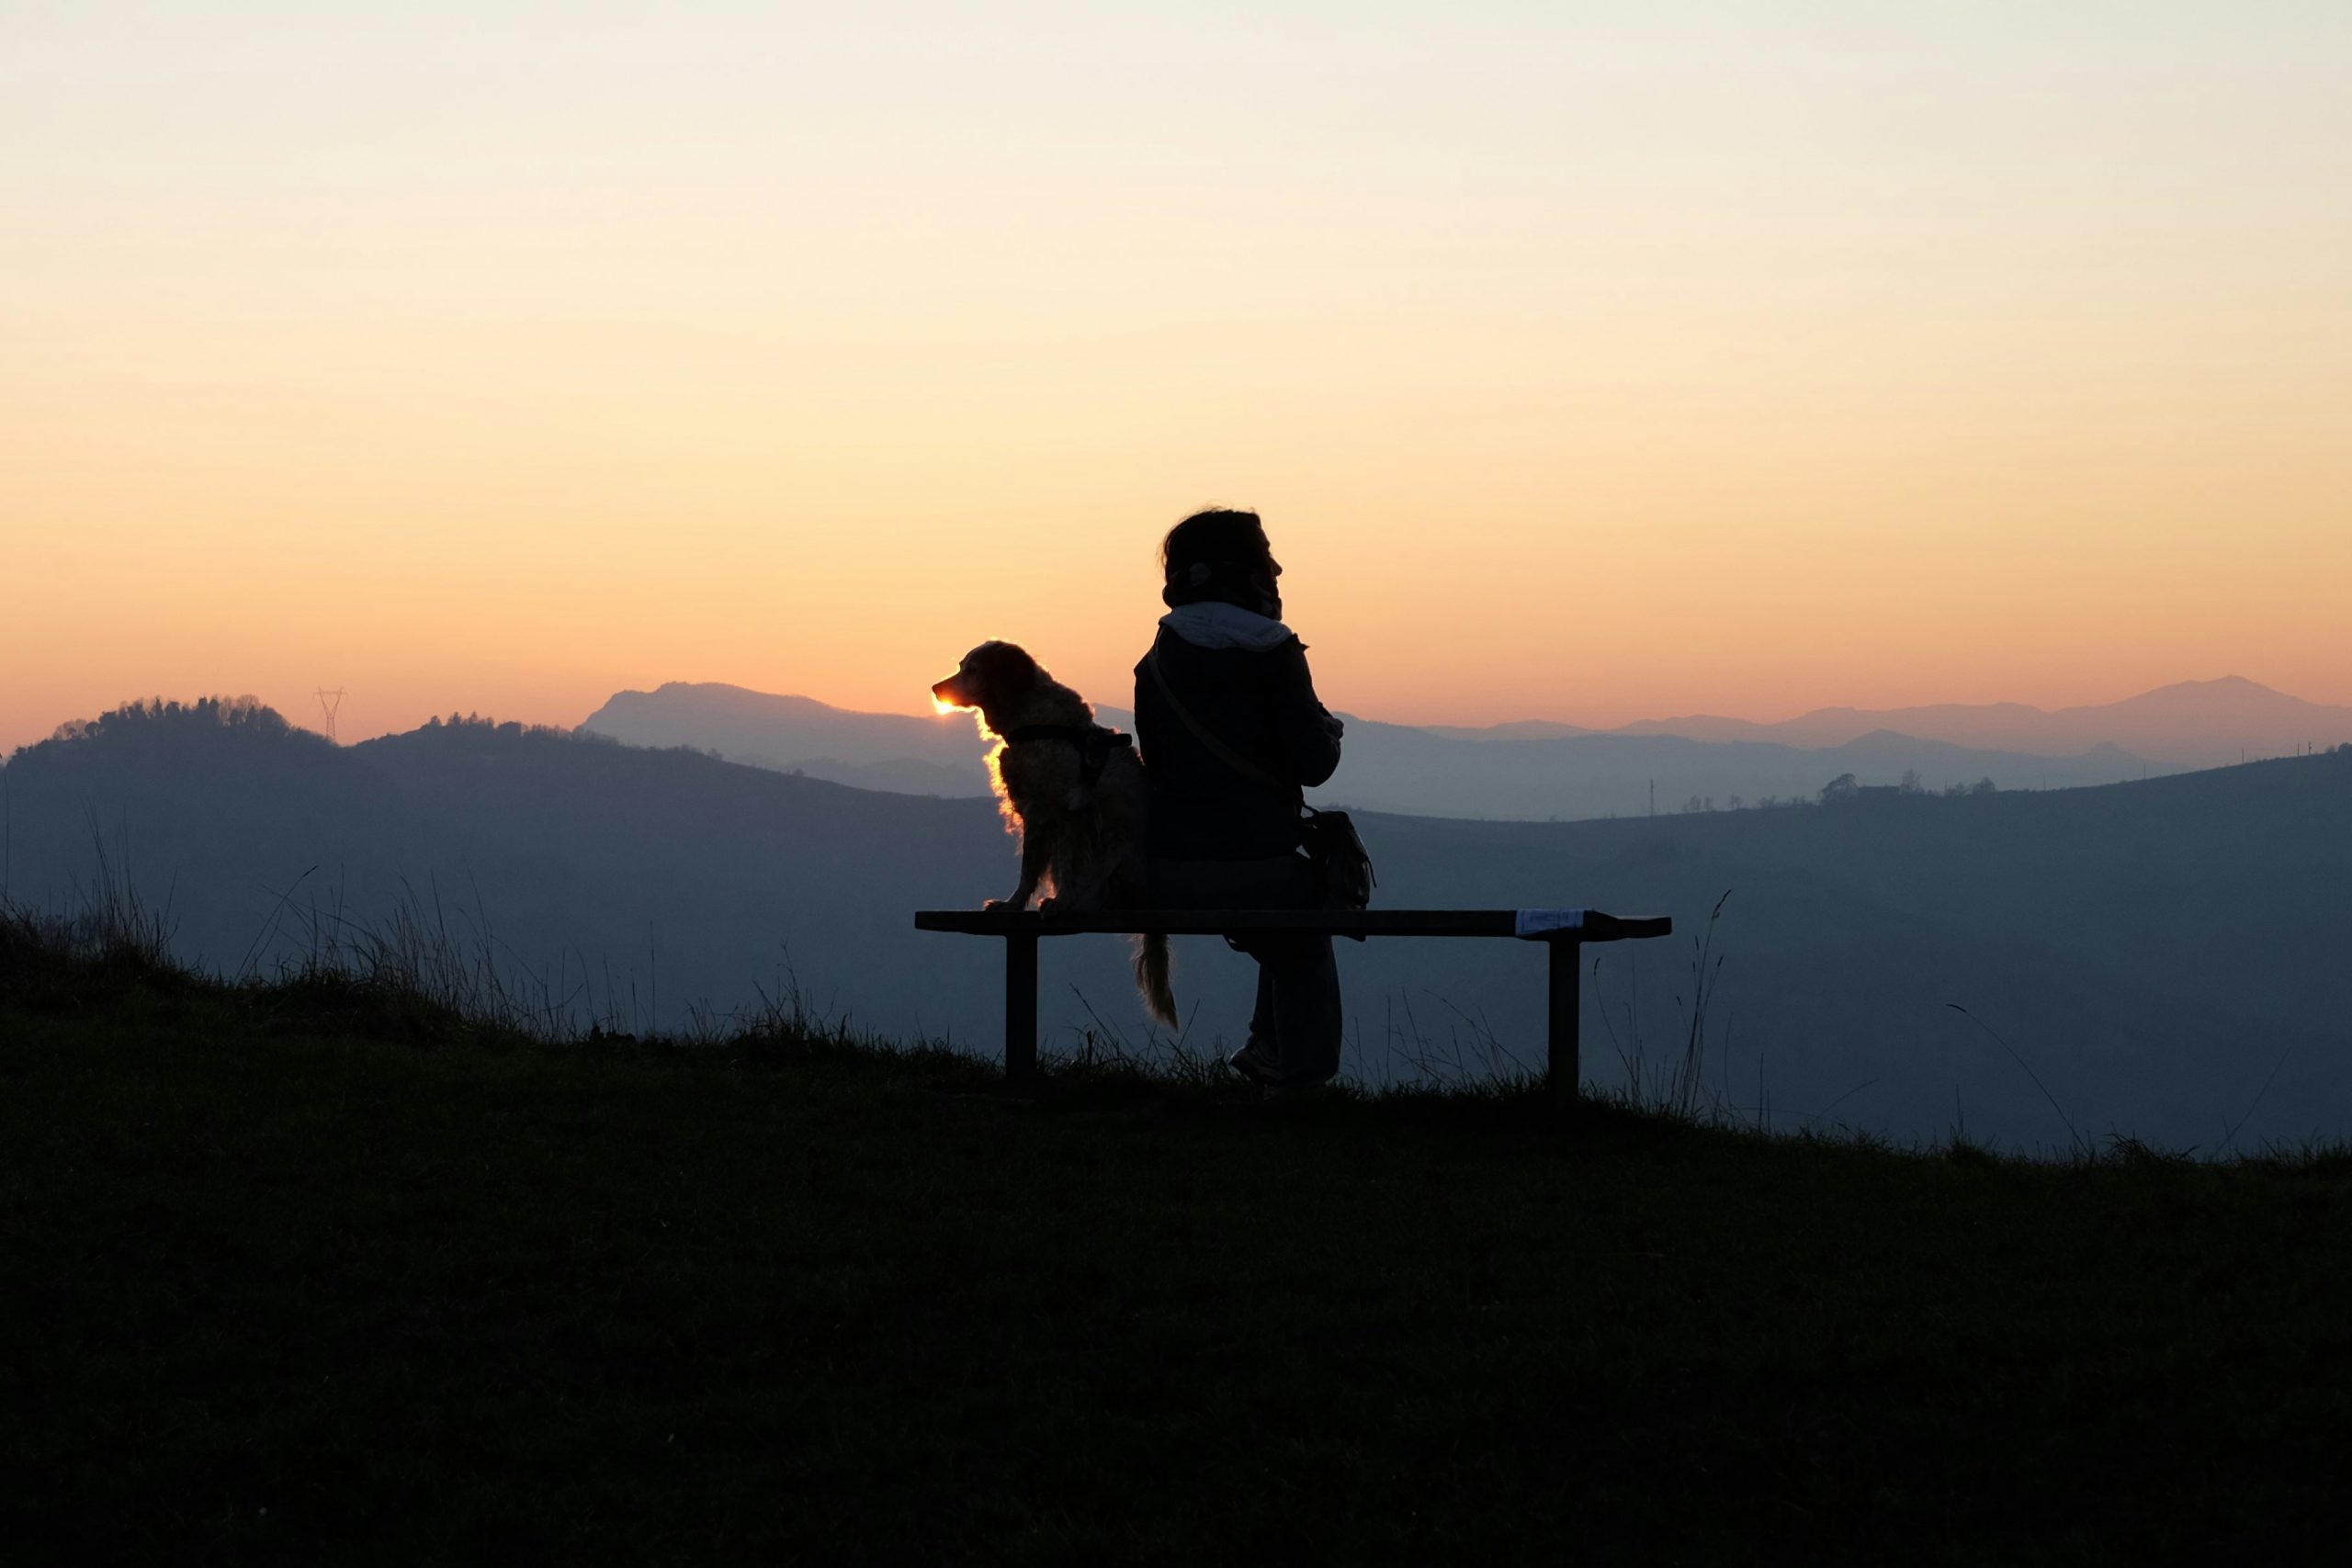 A woman and dog sit on a bench in front of an orange sunset